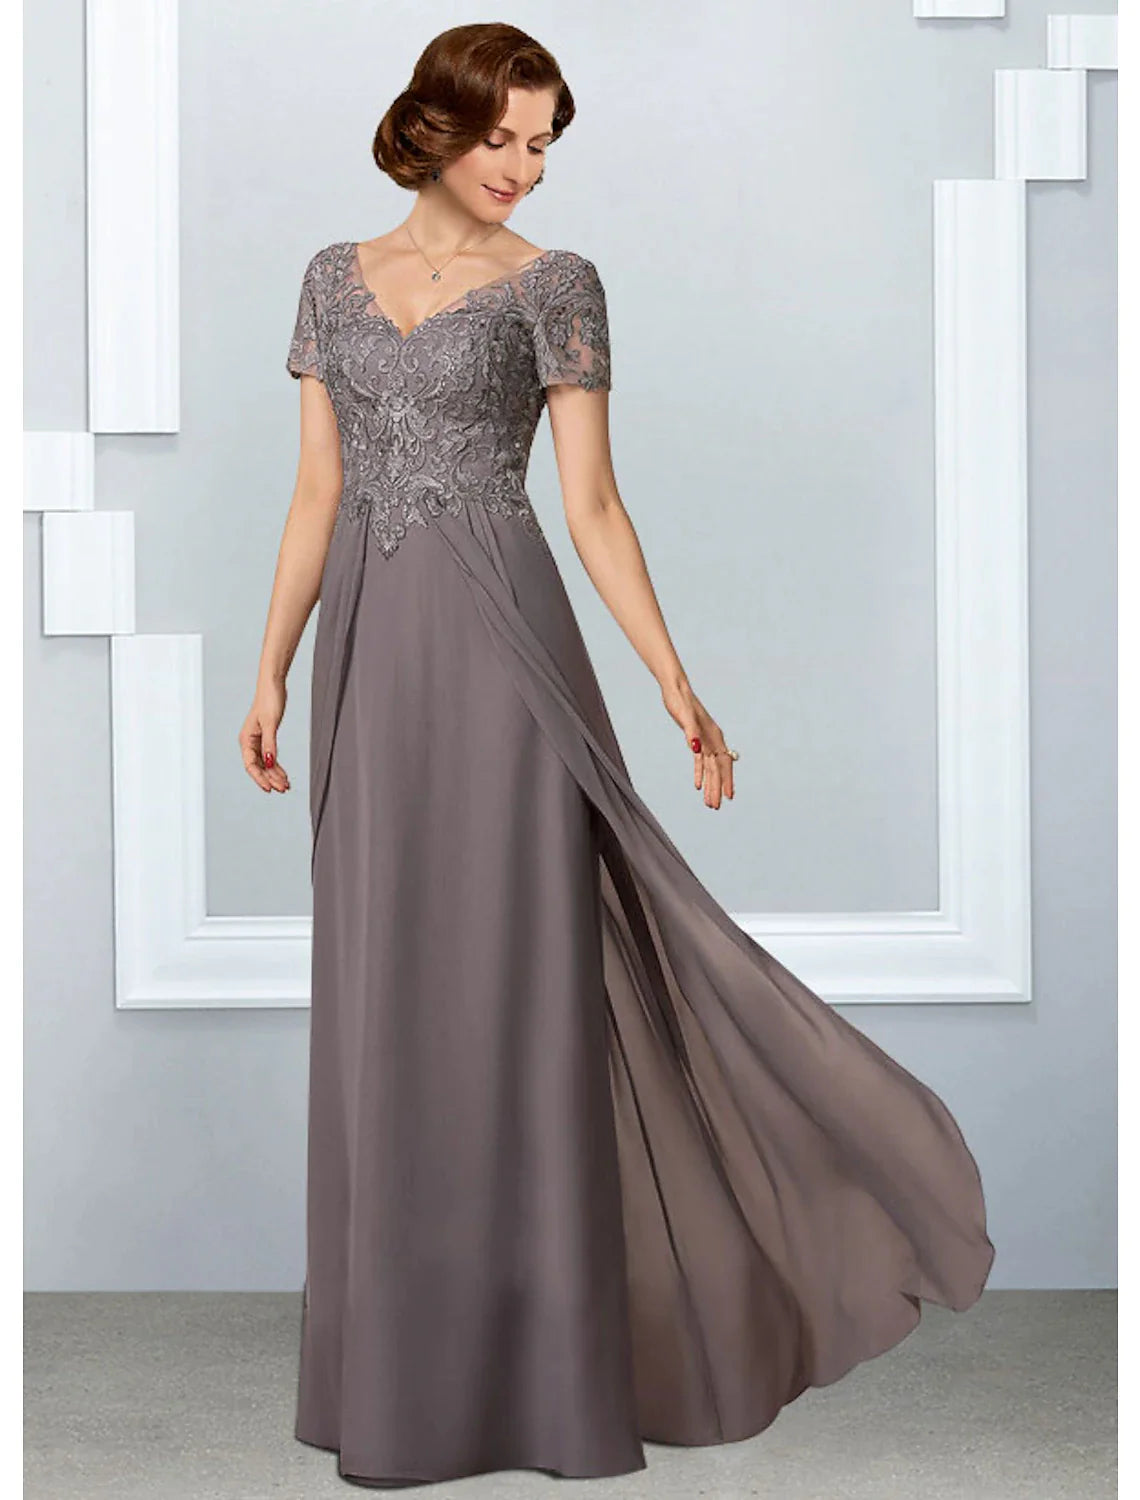 A-Line Mother of the Bride Dress Elegant V Neck Floor Length Chiffon Lace Short Sleeve with Pleats Appliques